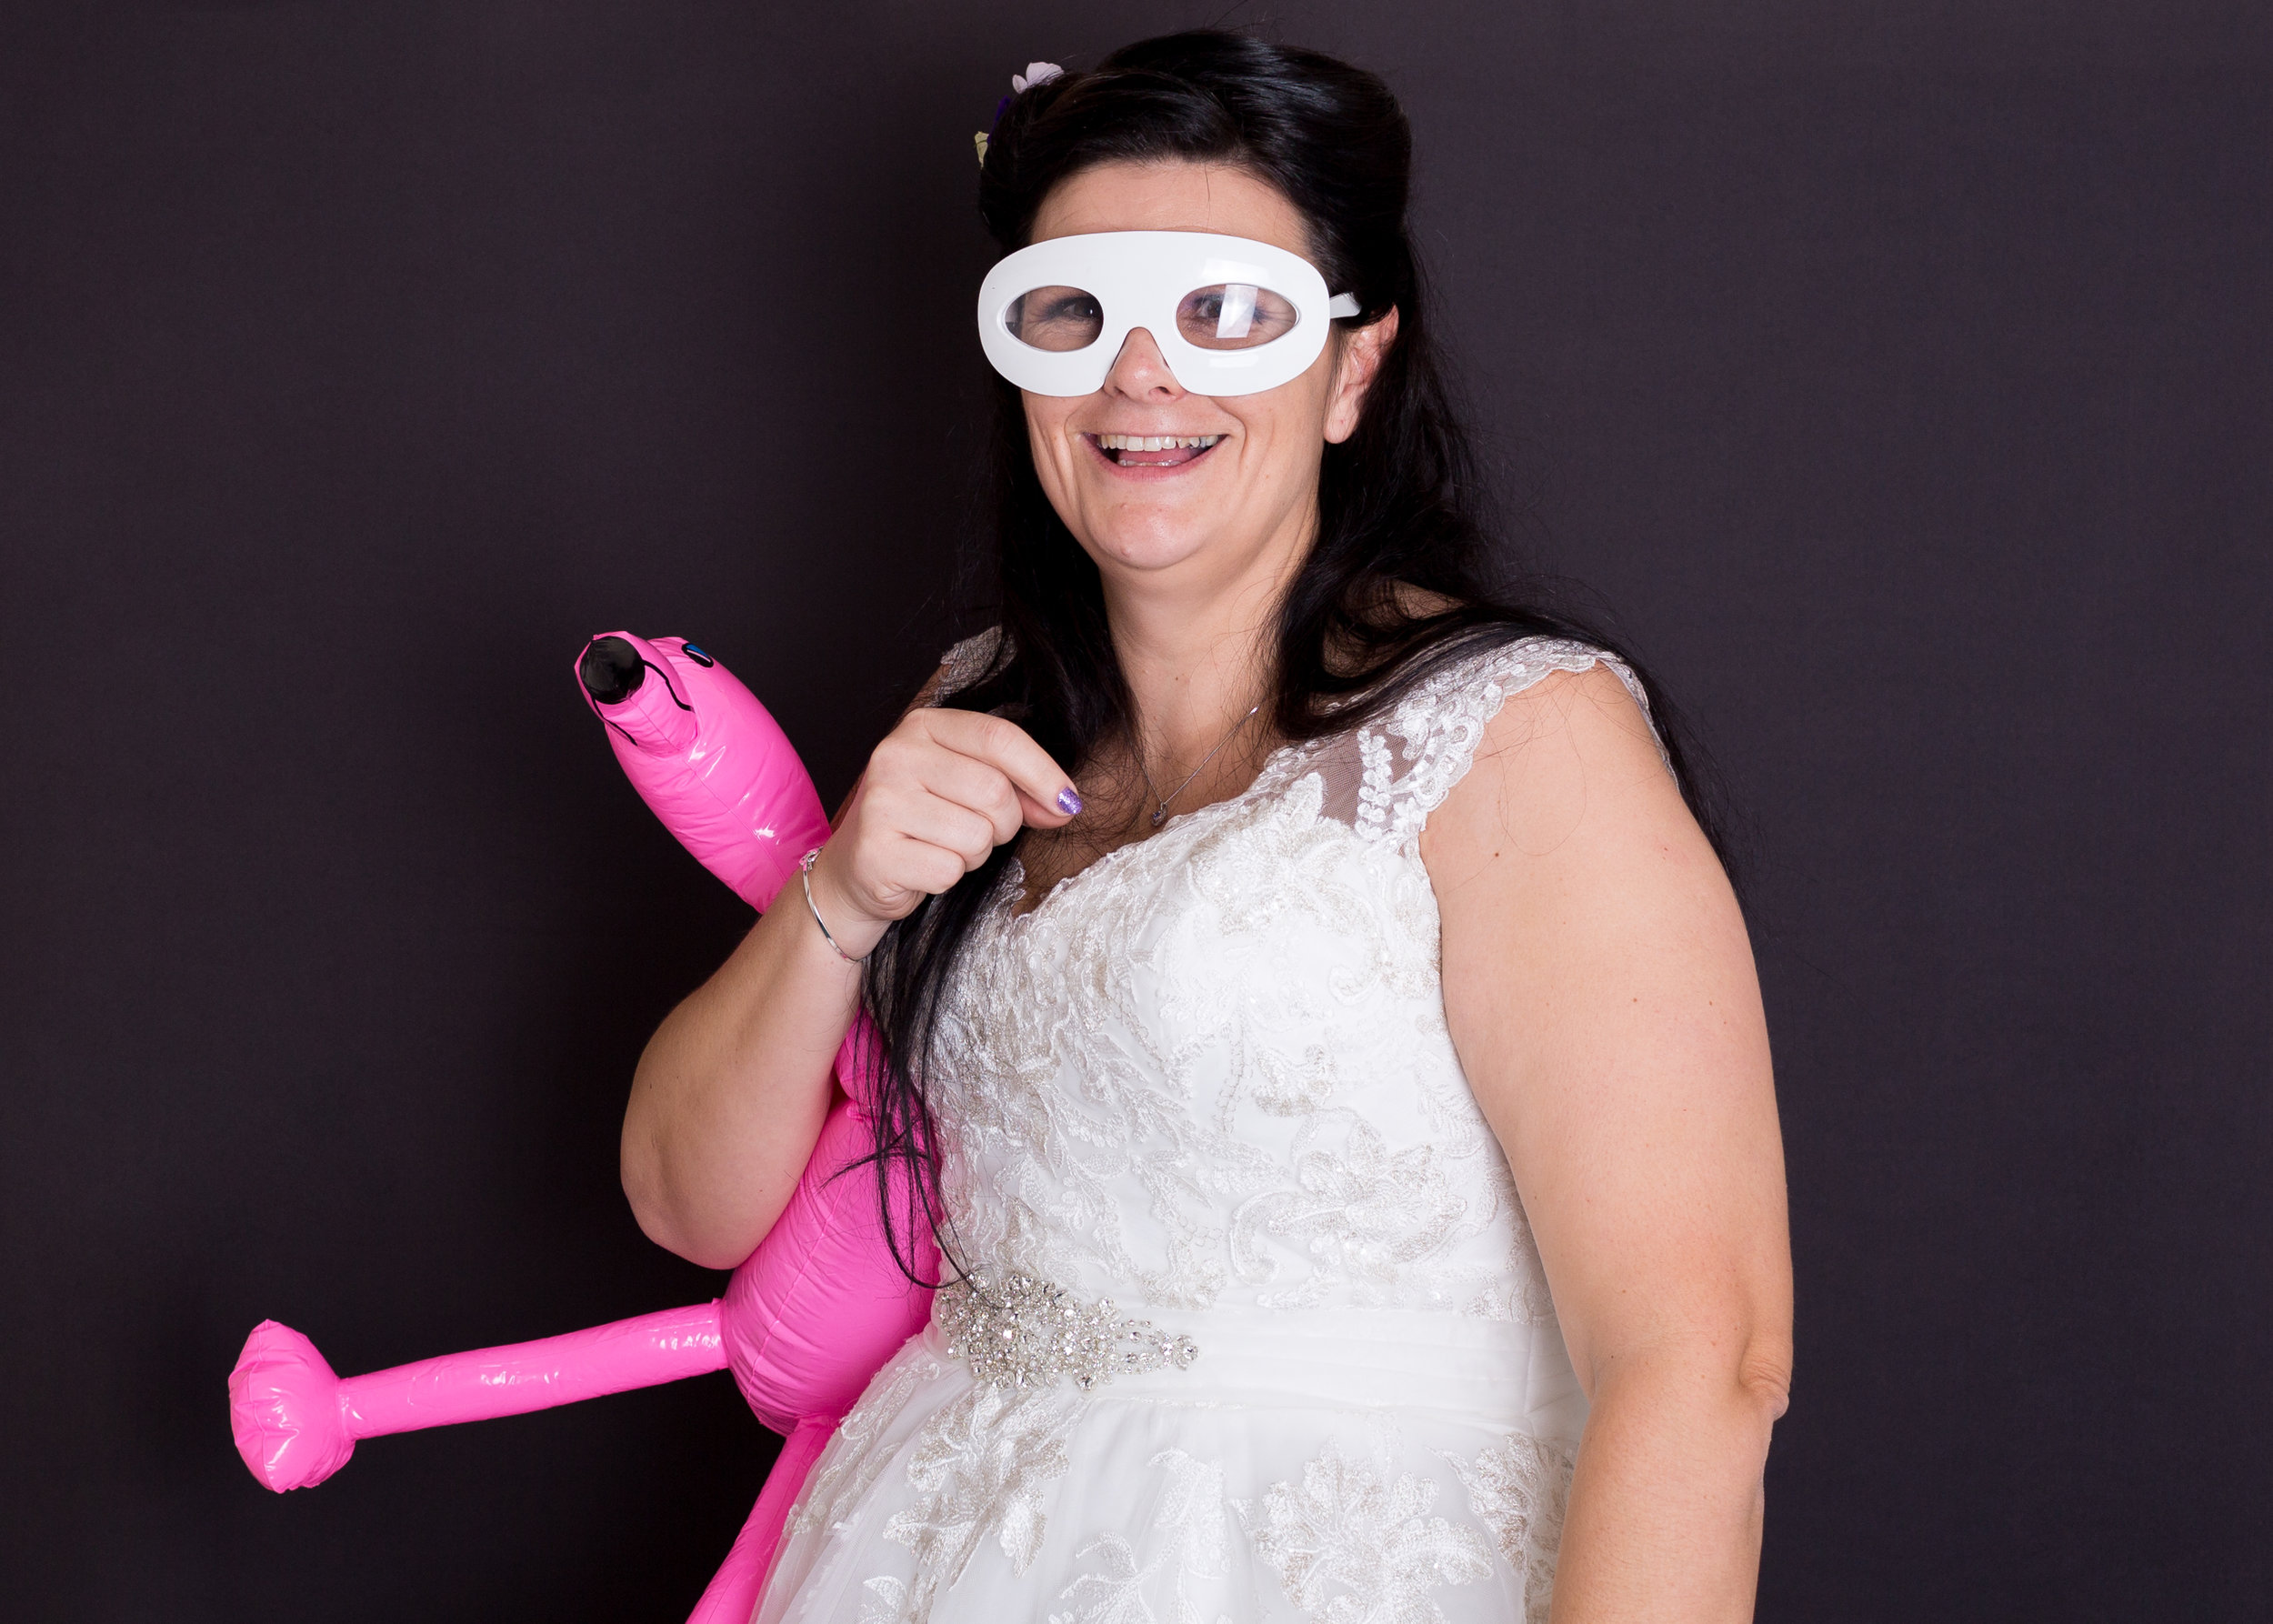 Photo Booth with a wedding photographer, south wales, Caerphilly, cardiff